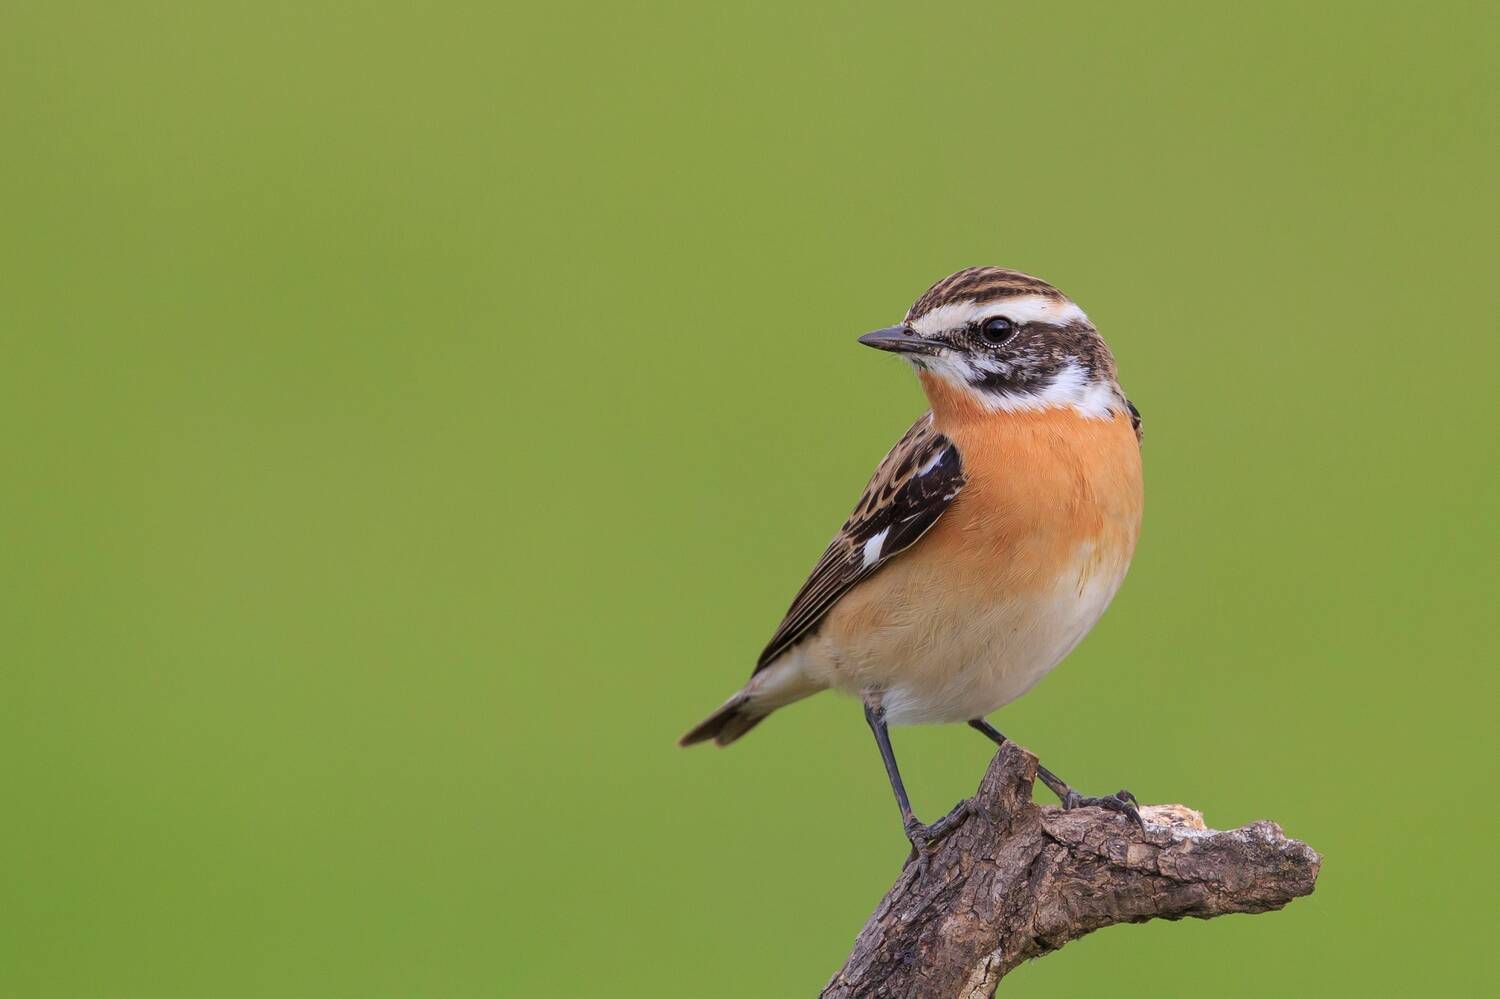 A little sparrow-sized bird perches on the end of a wooden twig, against a bright green background. It has an orange chest and white brown stripes on its face.